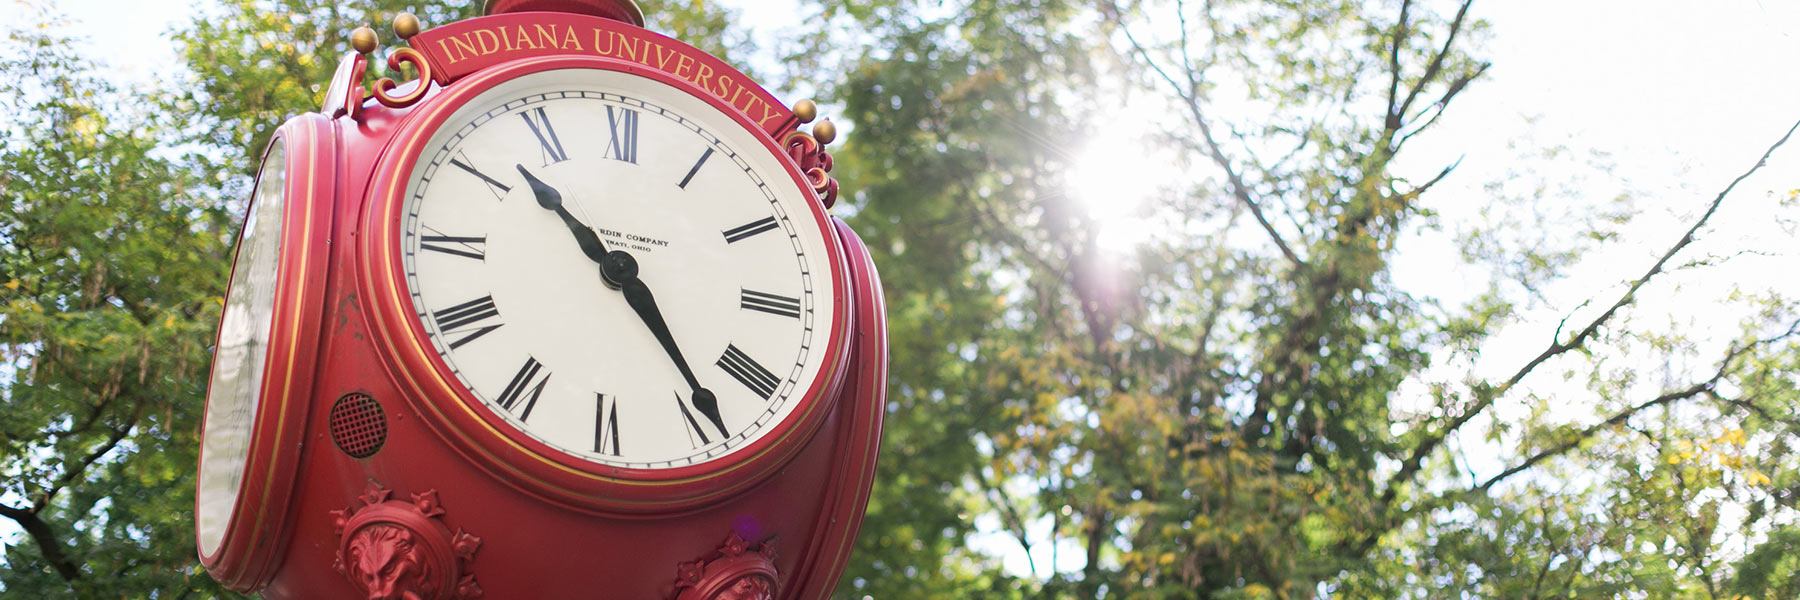 A closeup of a red outdoor clock on the IU Bloomington campus